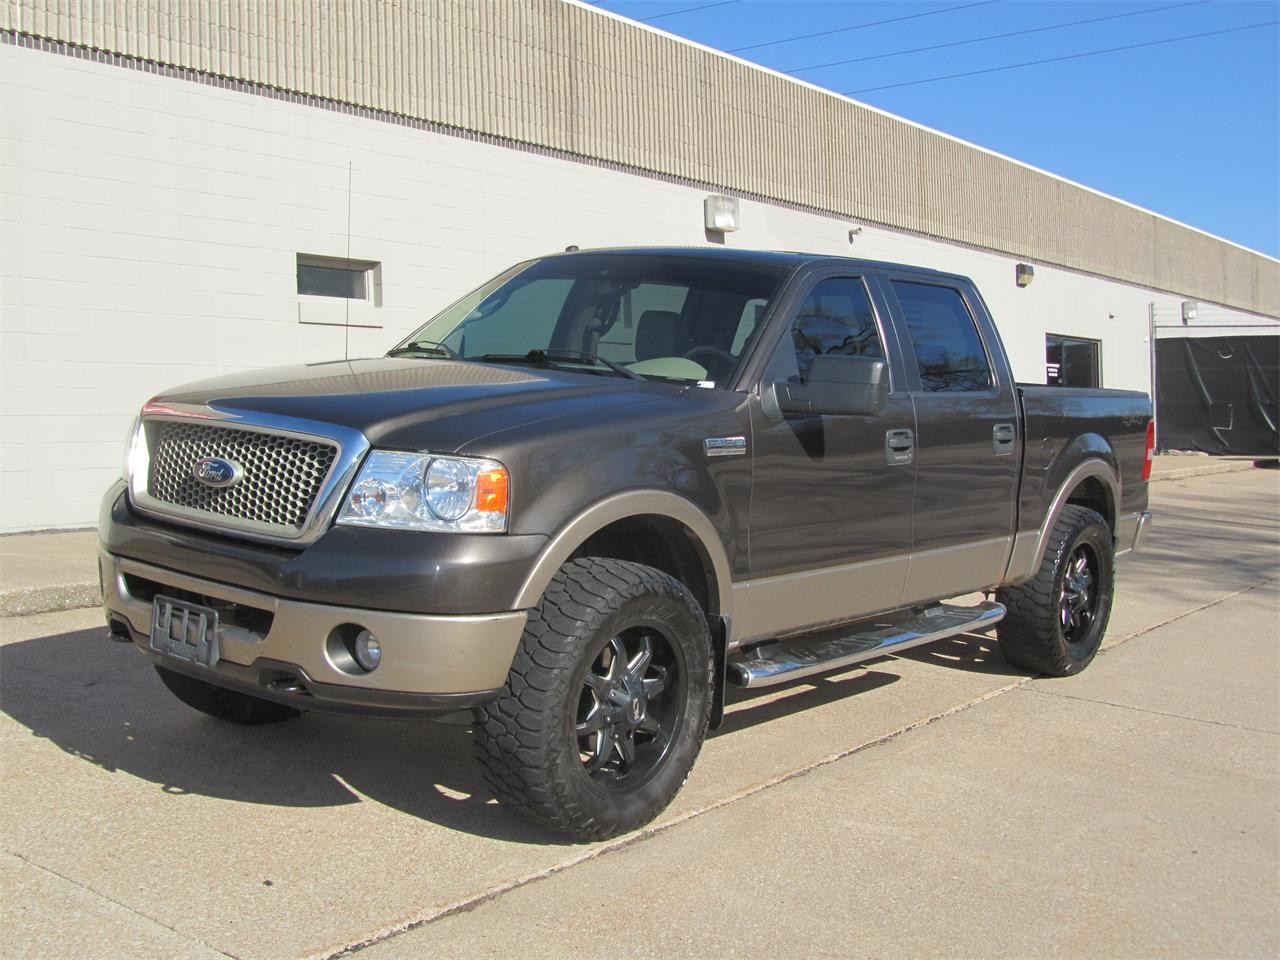 2006 FORD F-150